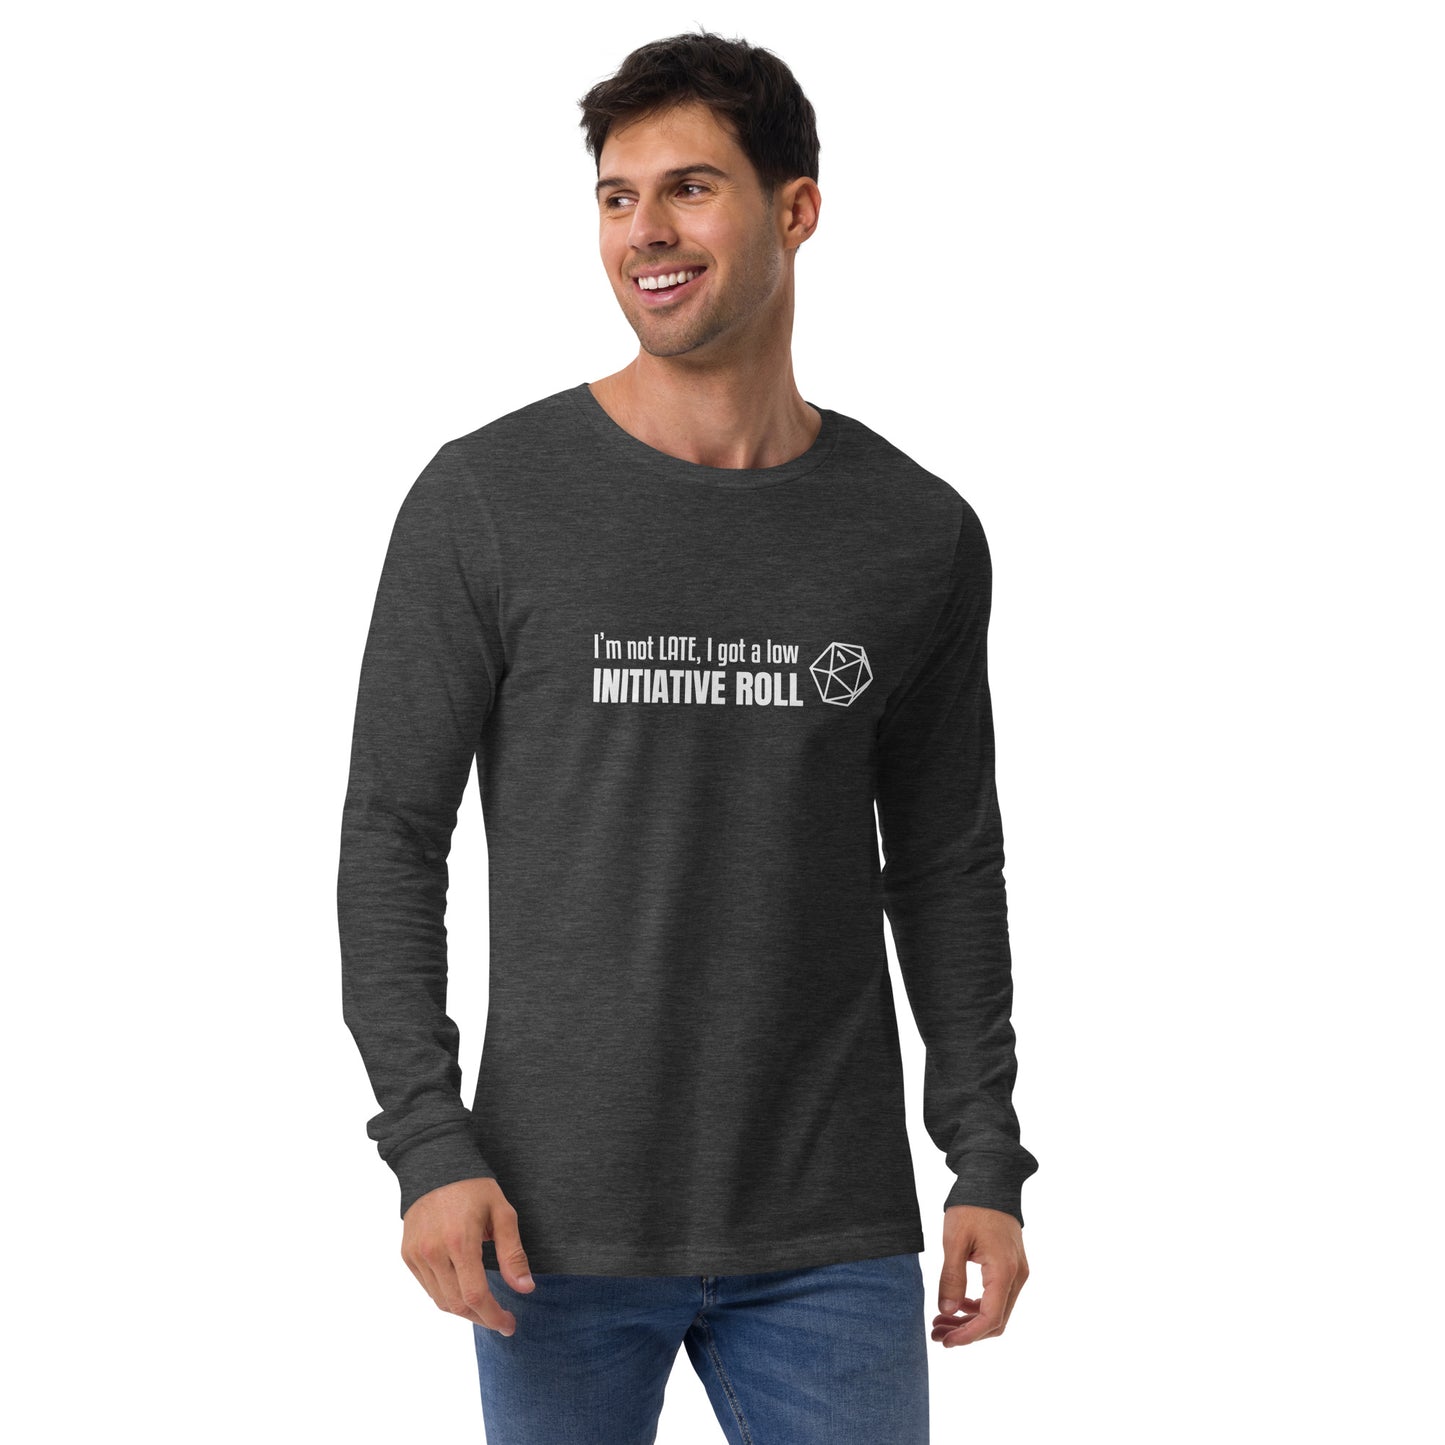 Male model wearing Dark Grey Heather long-sleeve tee with a graphic of a d20 (twenty-sided die) showing a roll of "1" and text: "I'm not LATE, I got a low INITIATIVE ROLL"